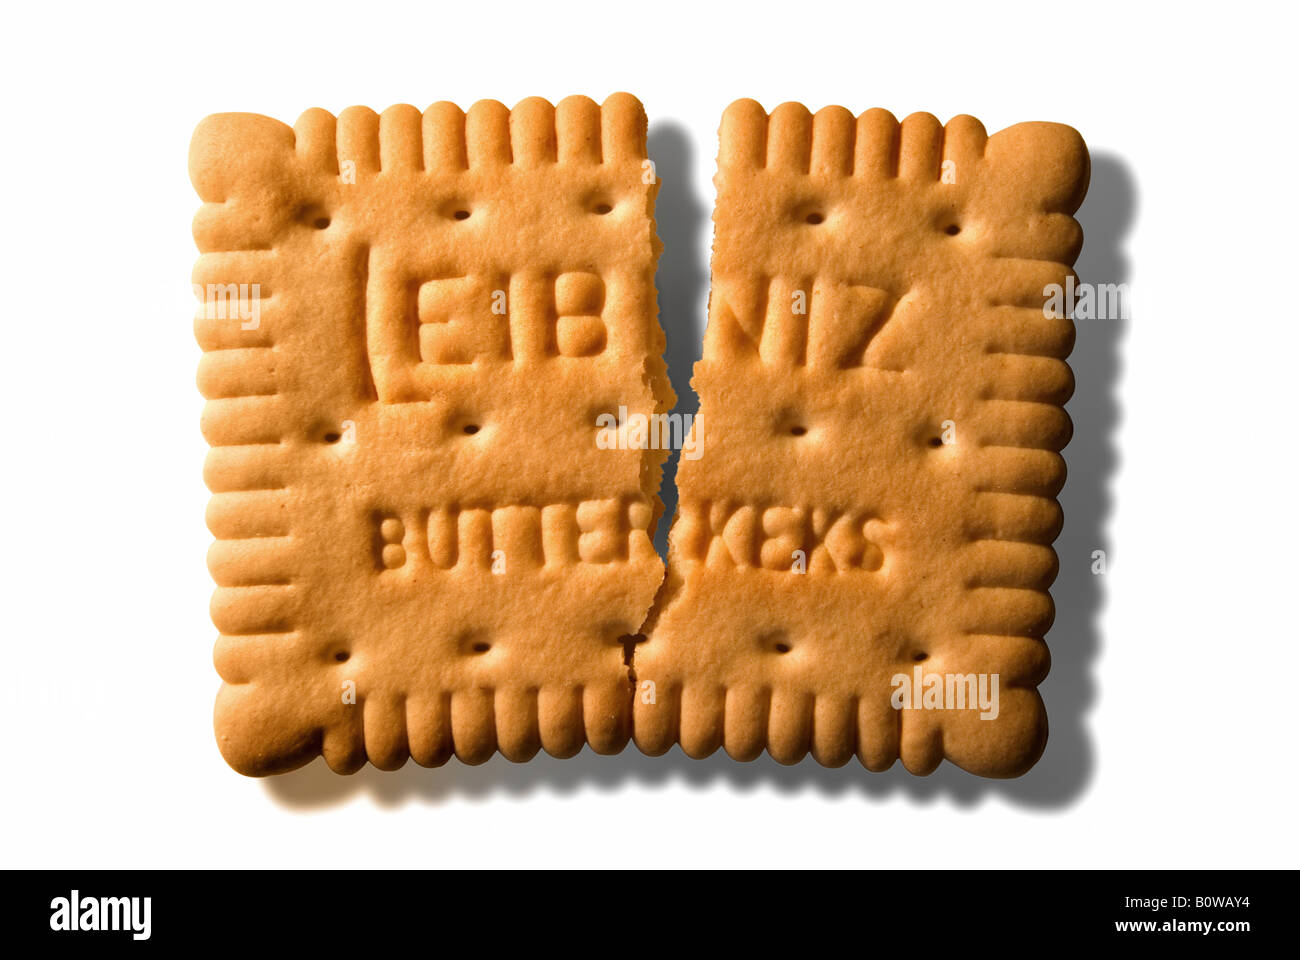 A Leibniz brand biscuit broken down the middle Stock Photo